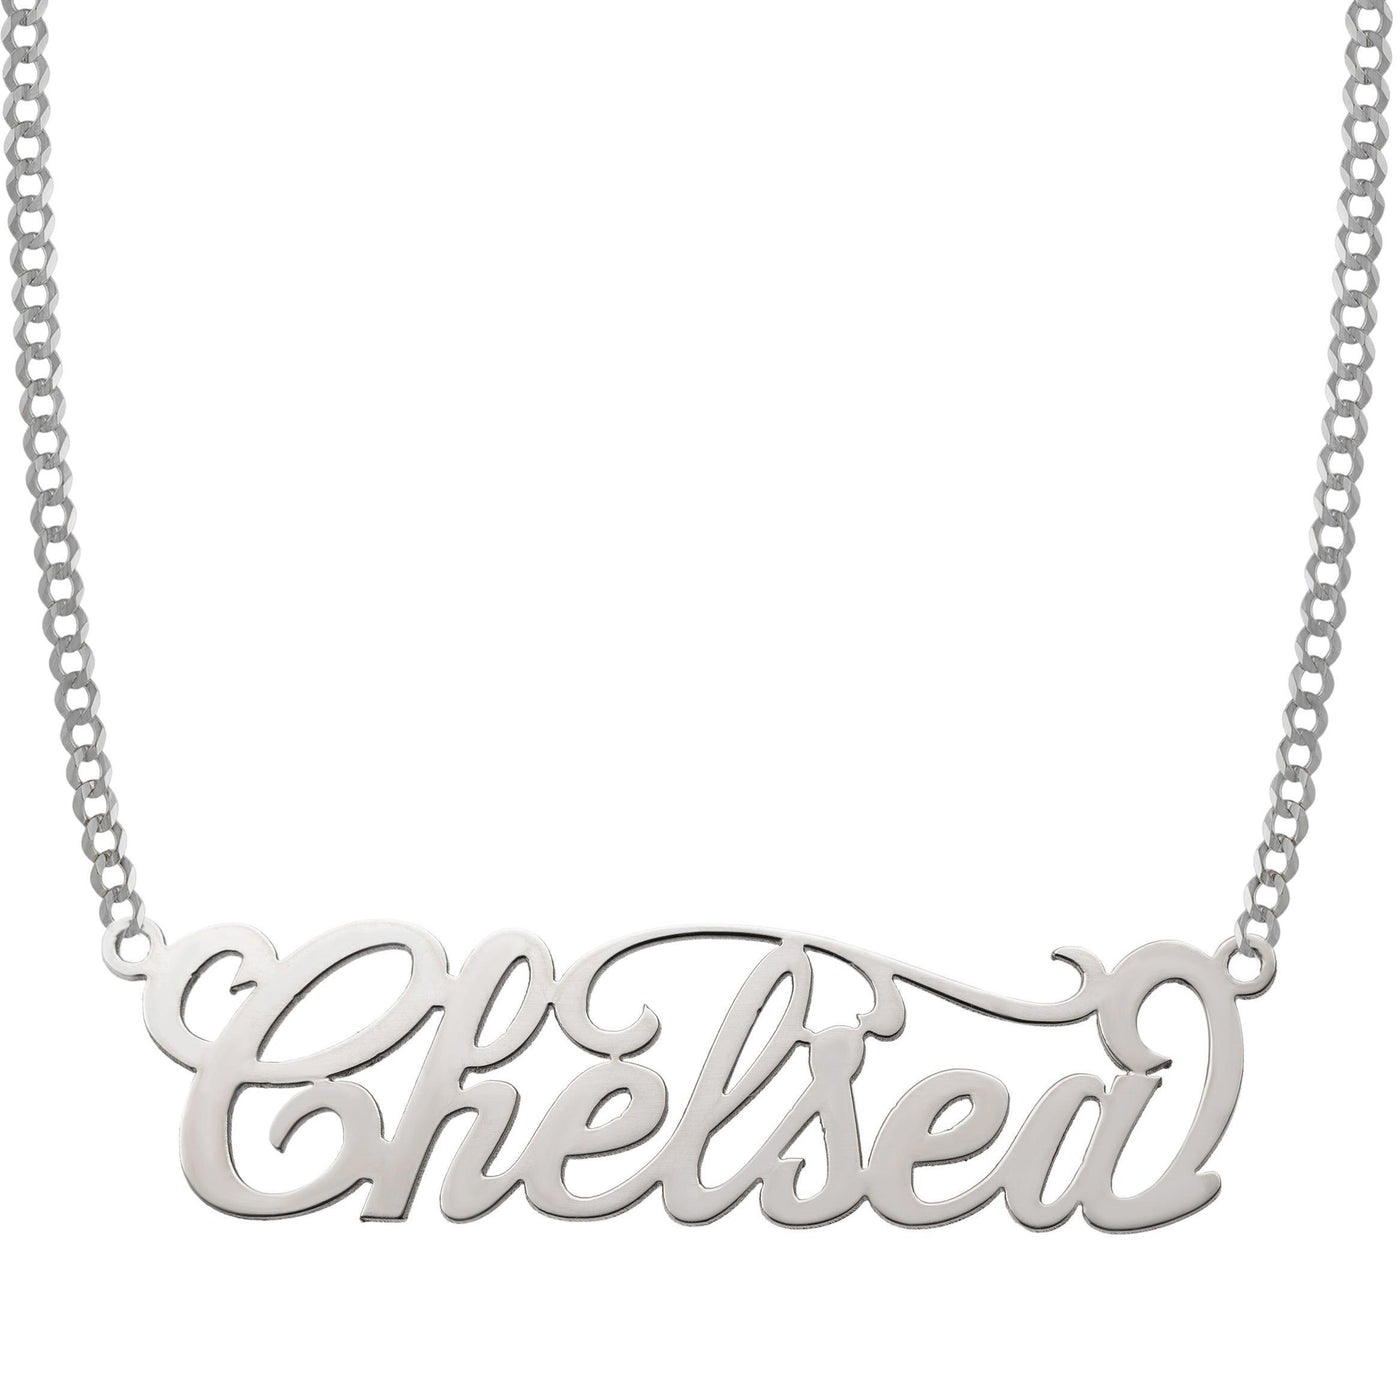 Ladies Script Name Plate Necklace 14K White Gold - Style 58 - bayamjewelry